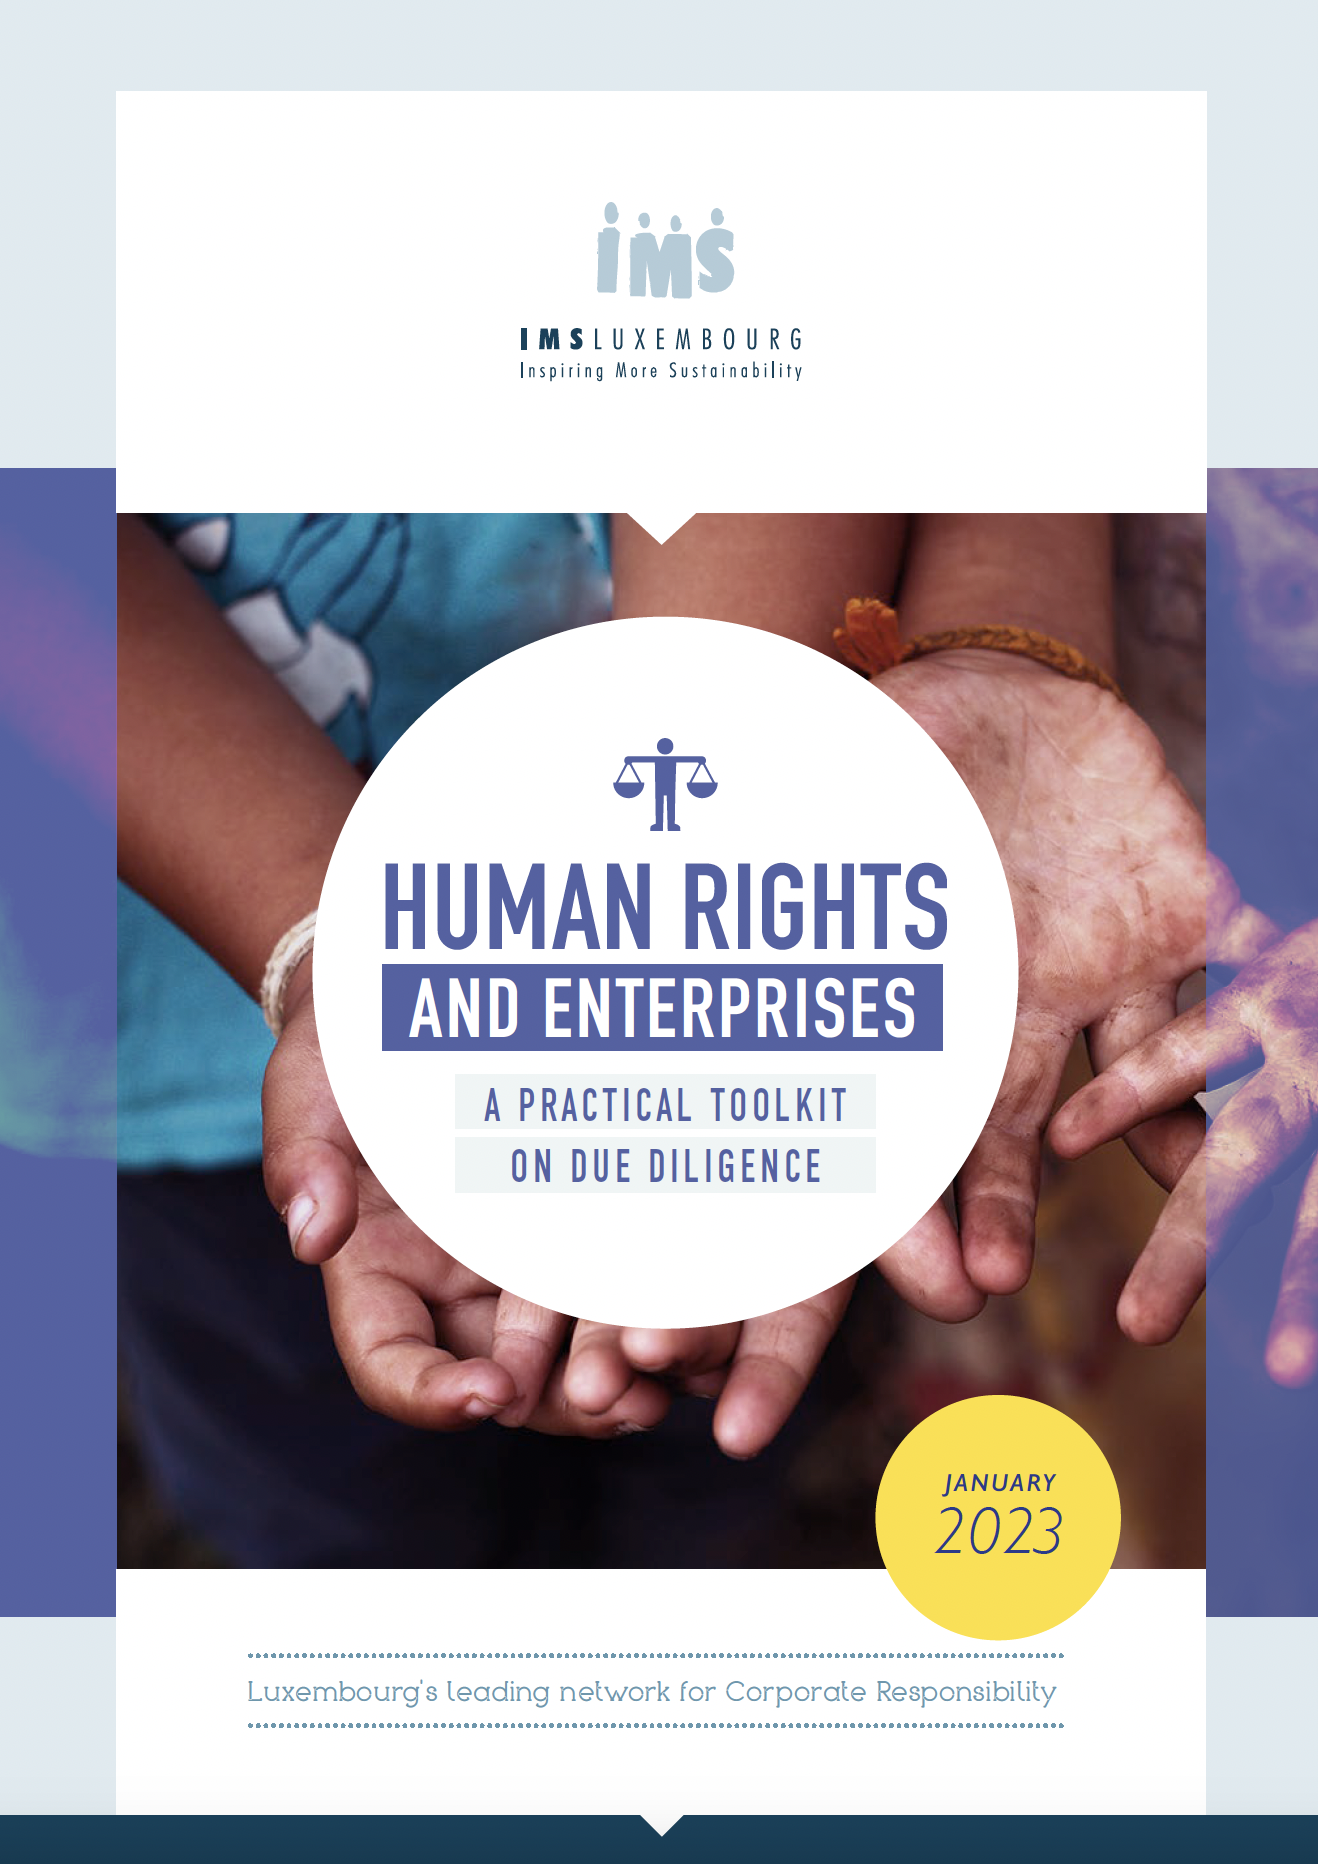 Human Rights and Enterprises: A practical toolkit on due diligence